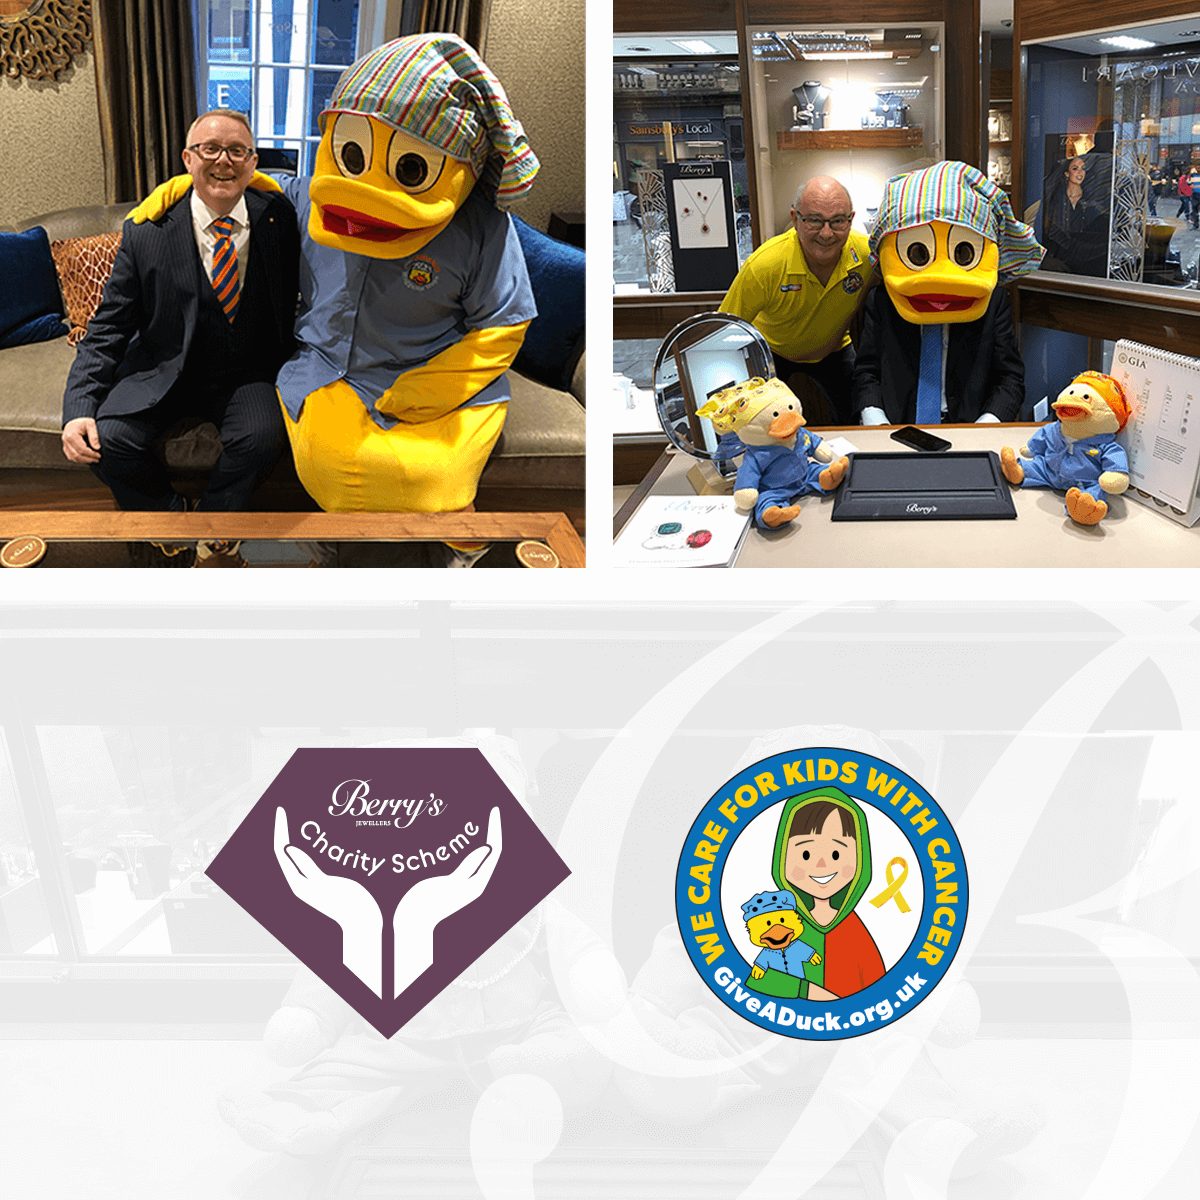 Berry's Charity Scheme 2020: The Give A Duck Foundation